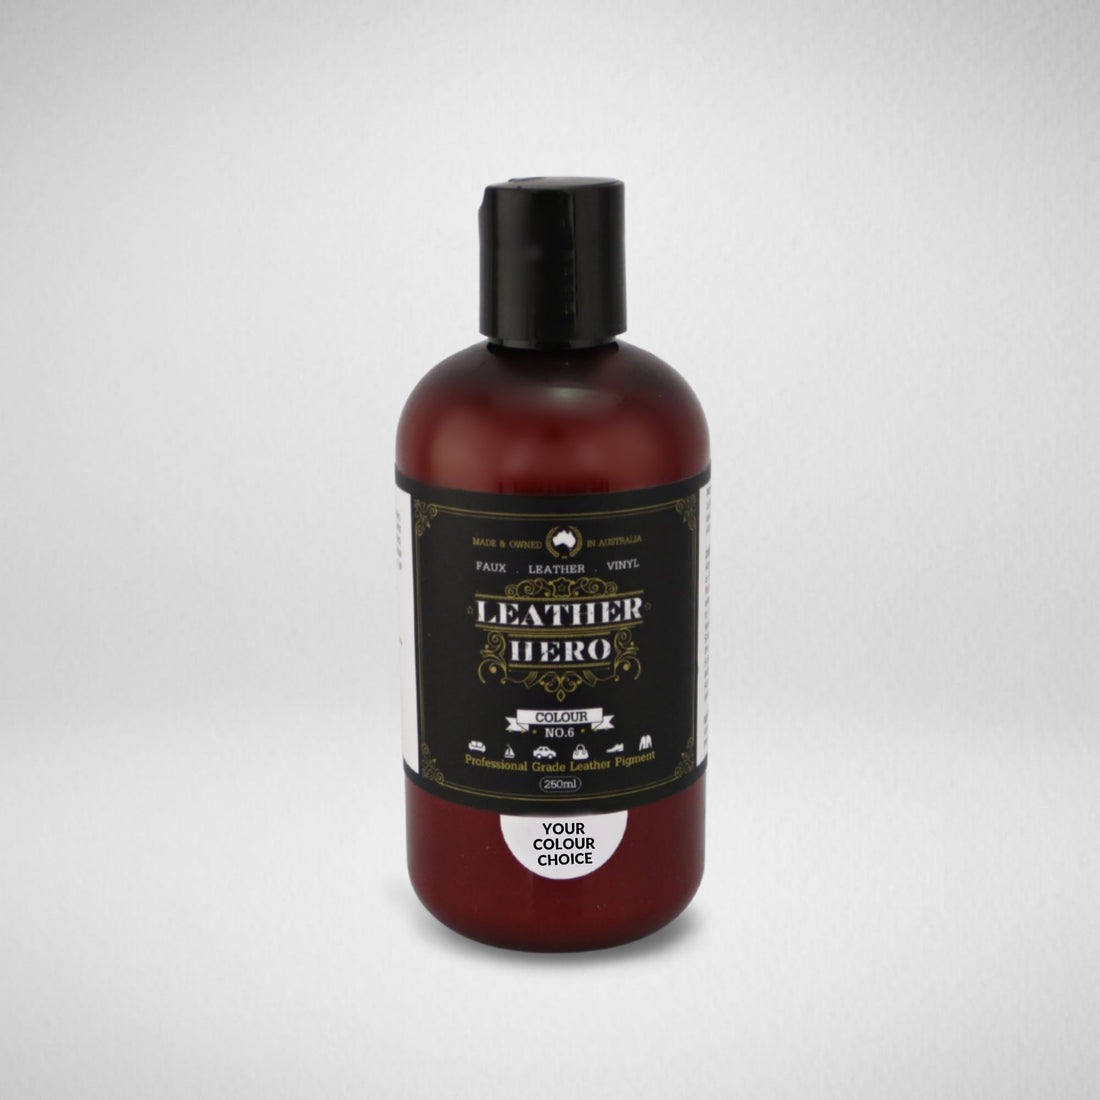 Leather Paint - Beige Leather Repair & Recolouring Leather Hero Australia